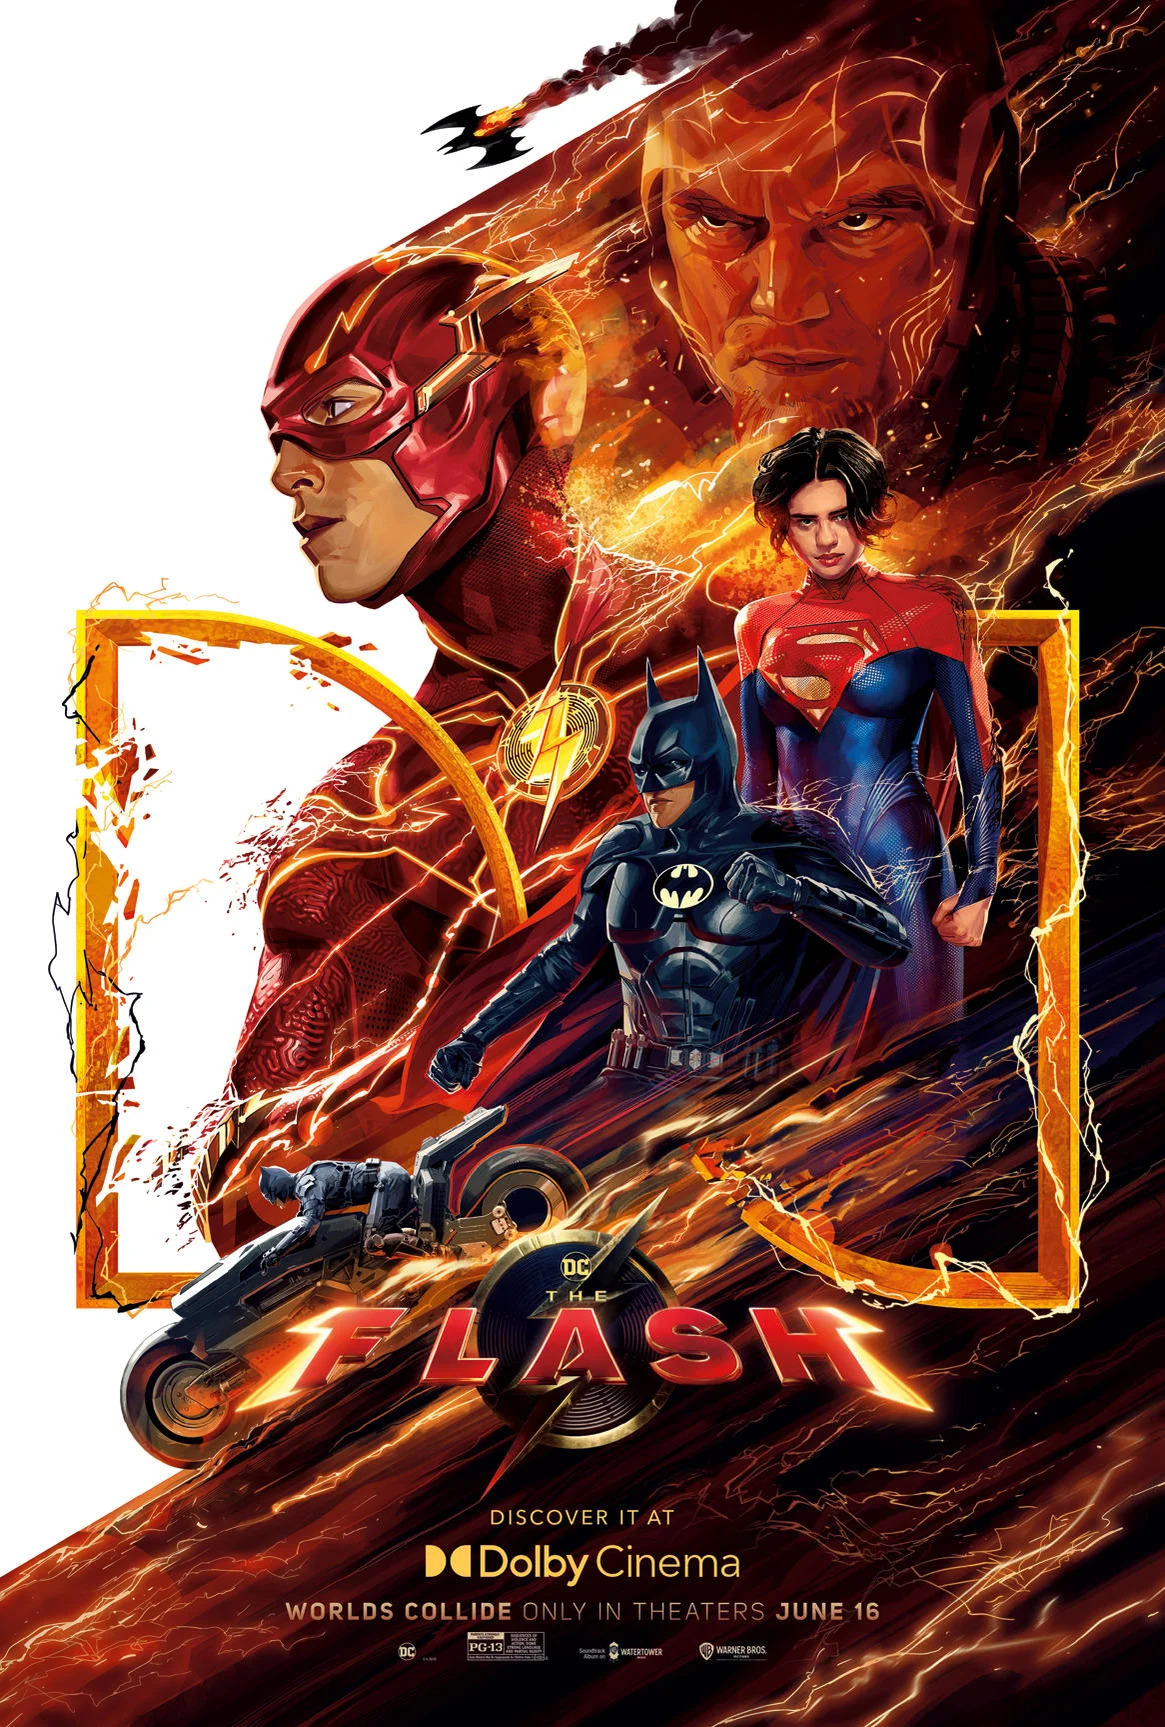 The Flash Jeremy Irons Trailer & Poster 1